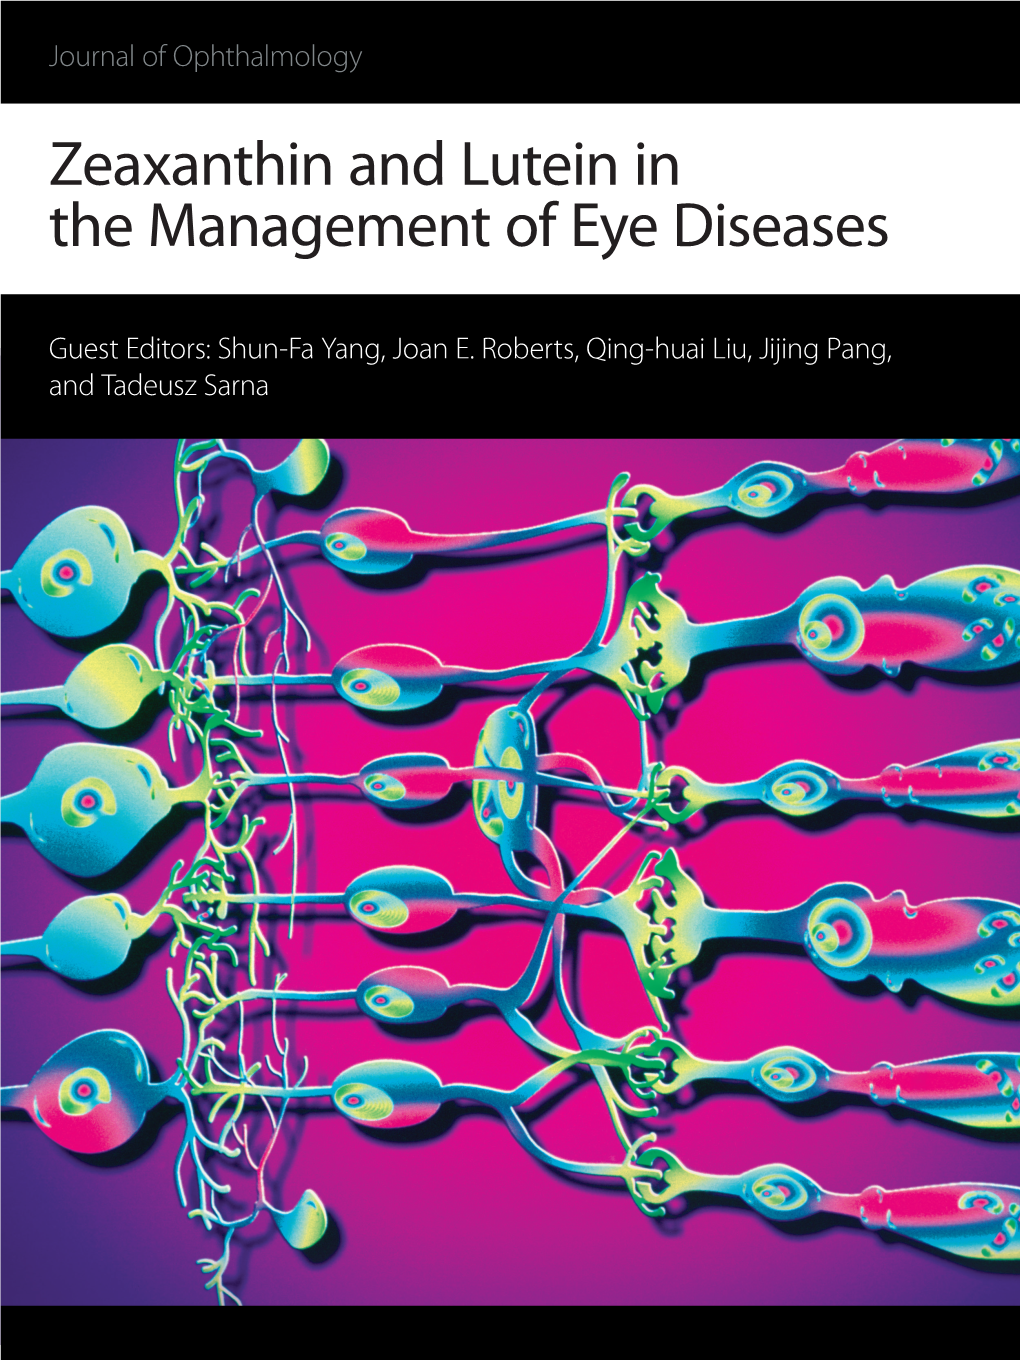 Zeaxanthin and Lutein in the Management of Eye Diseases